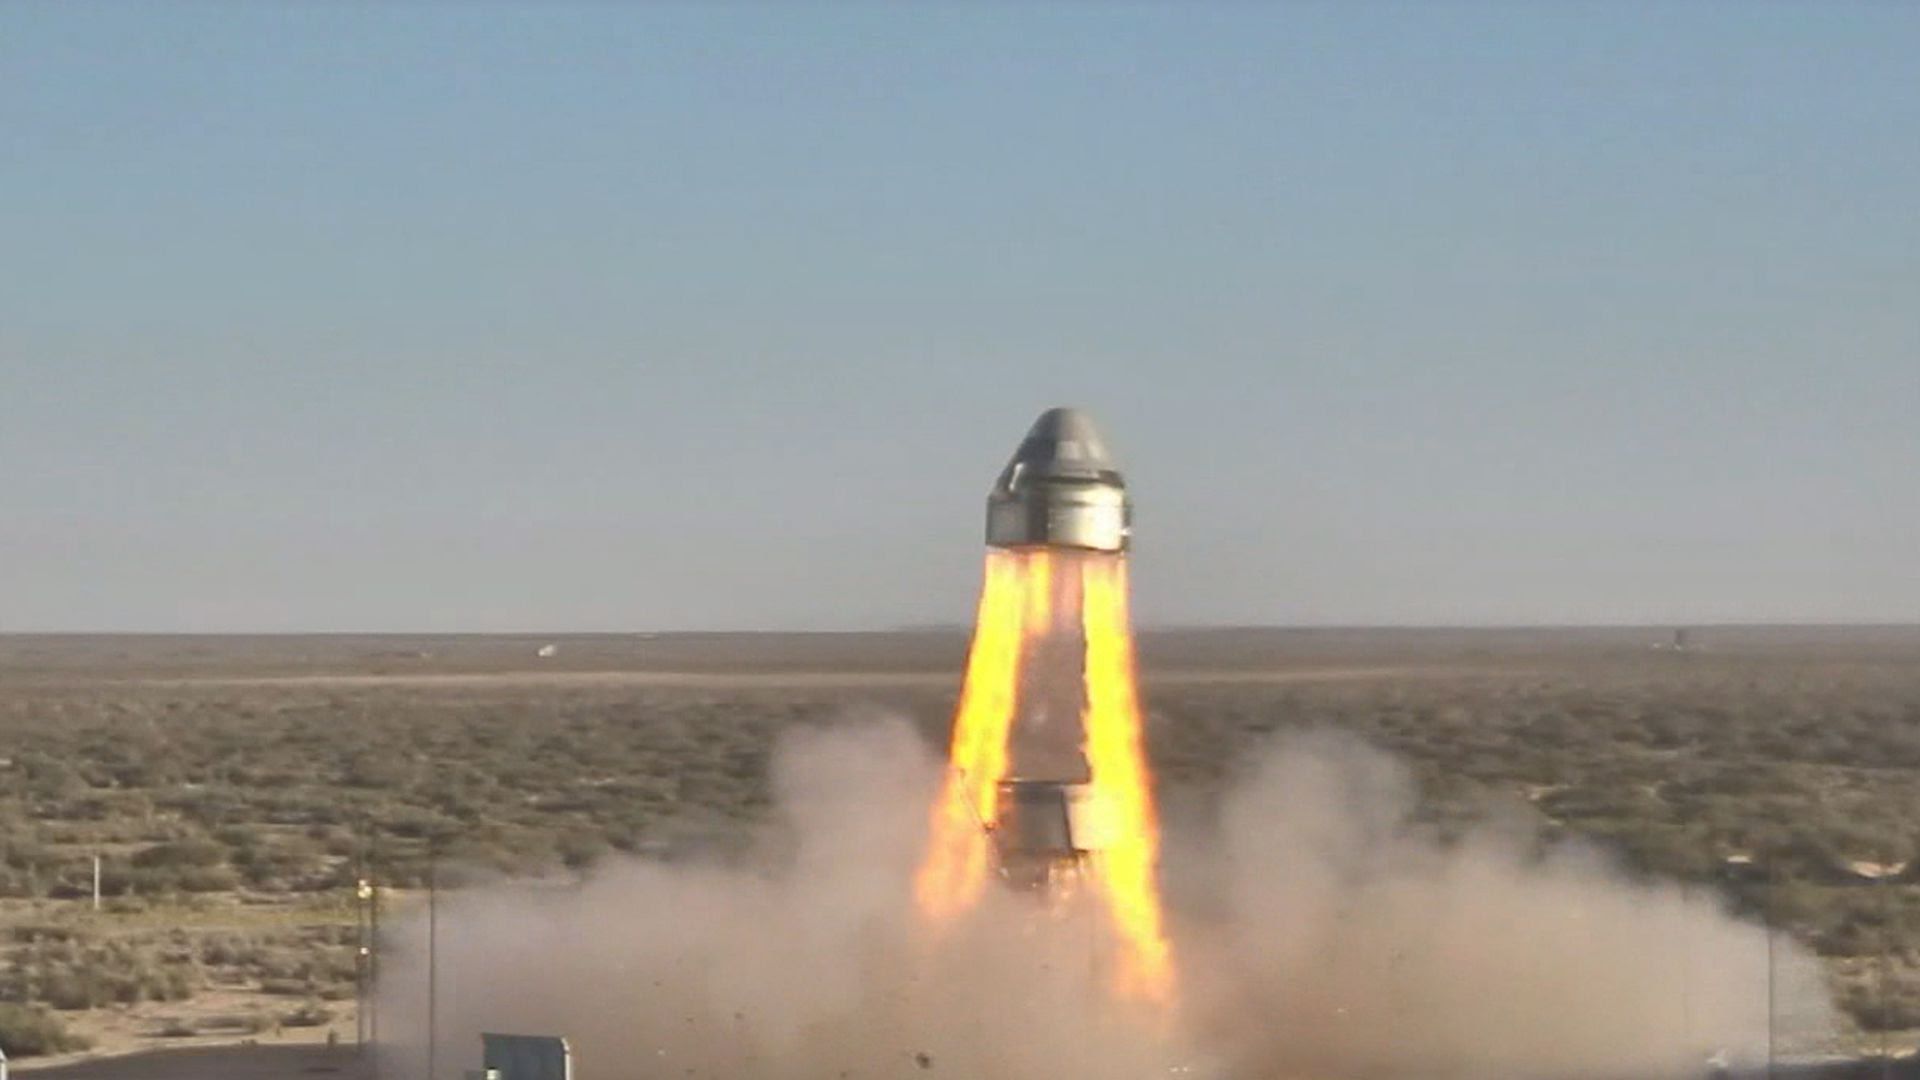 Boeing's Starliner during a test of its abort system in New Mexico